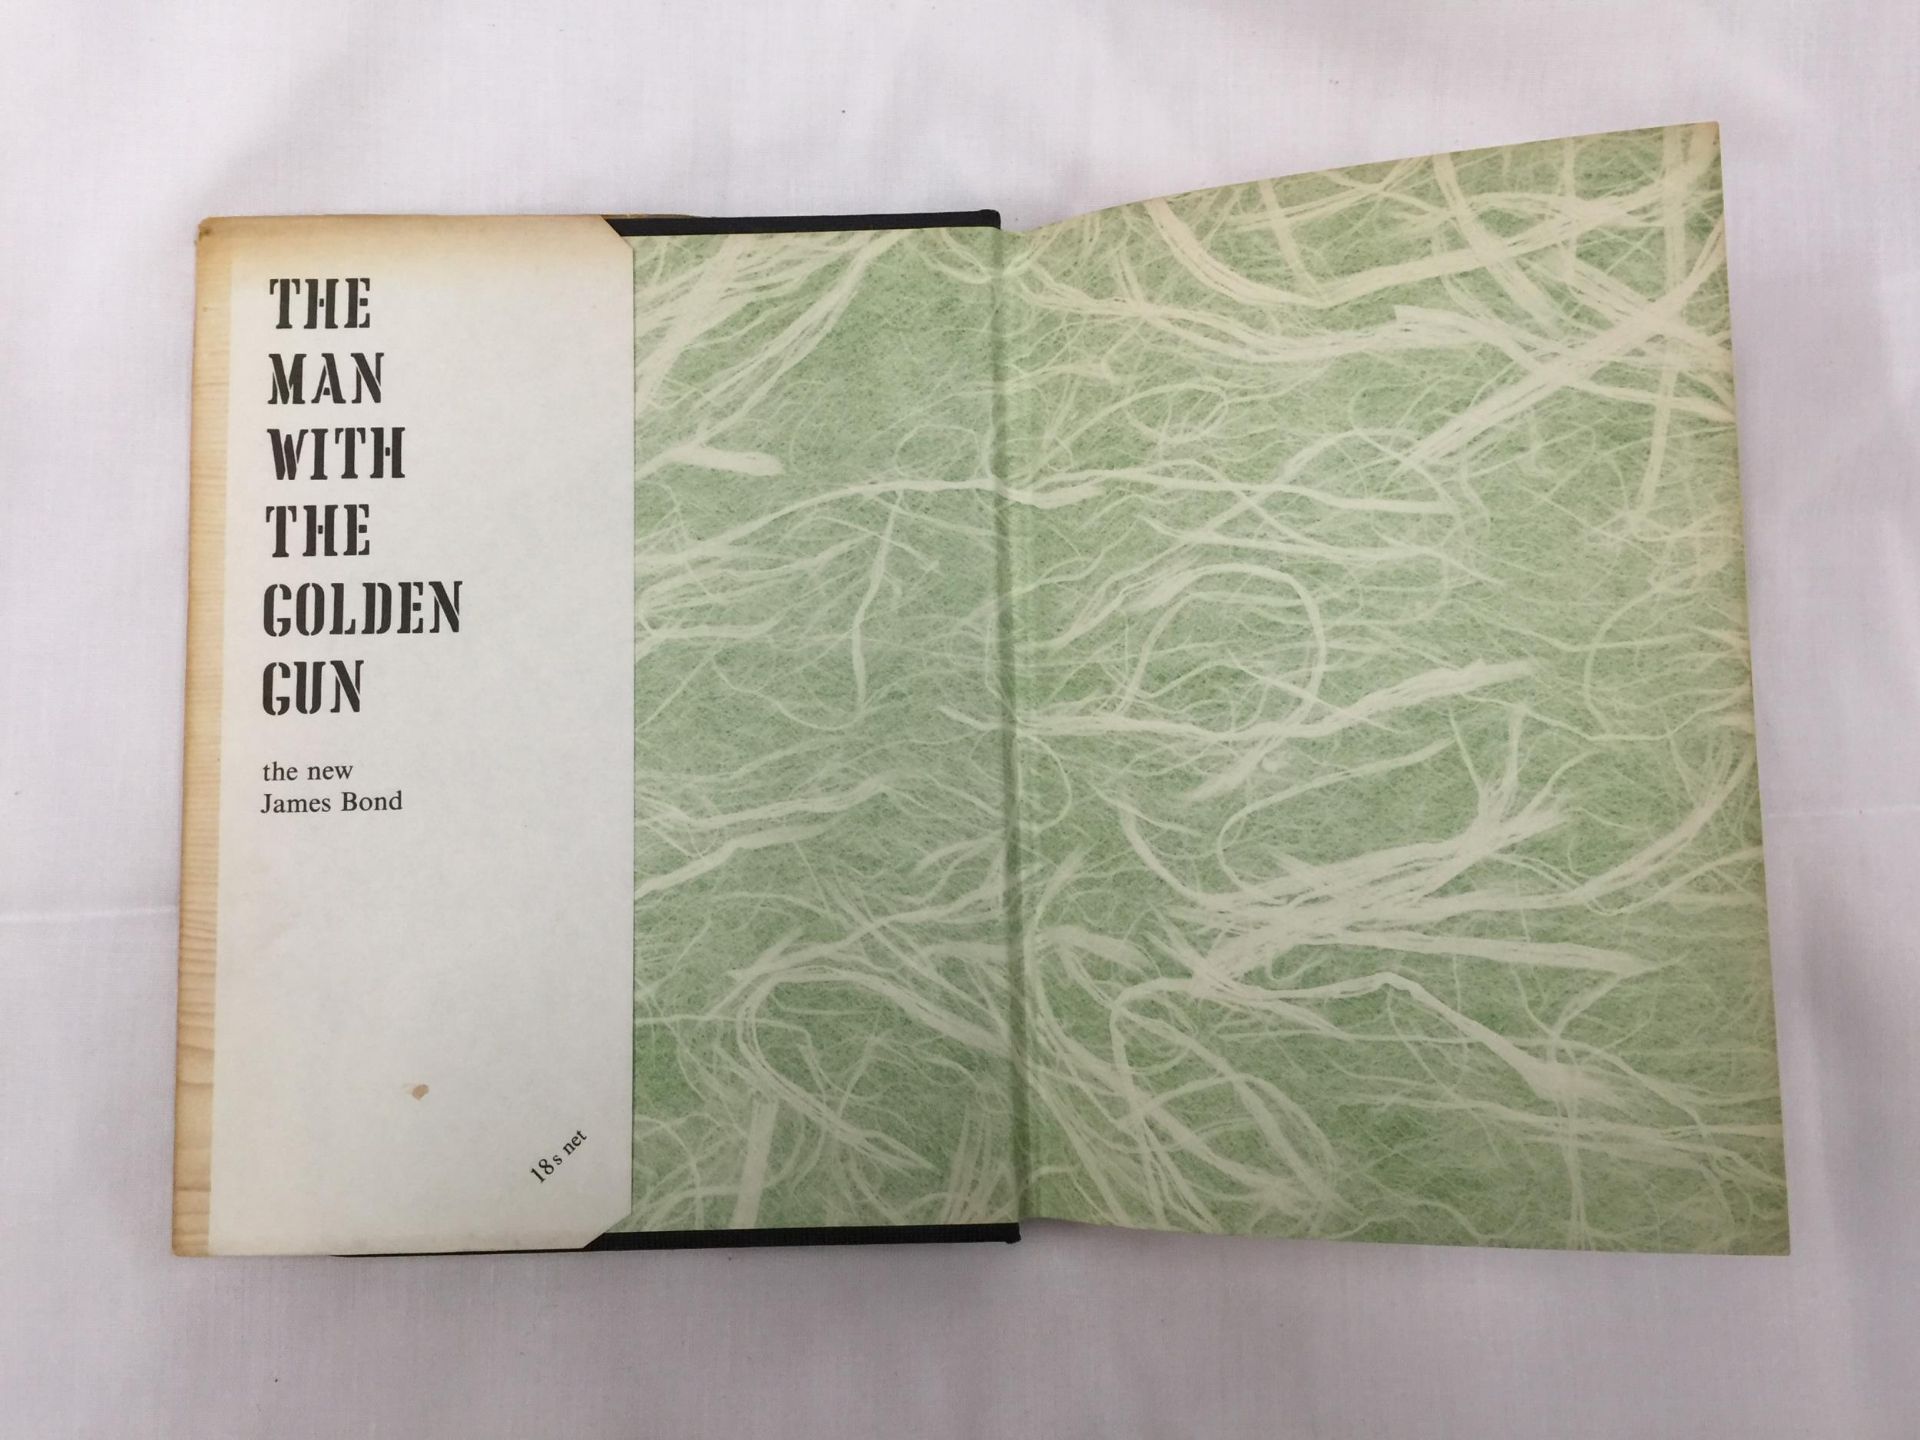 A FIRST EDITION JAMES BOND NOVEL - THE MAN WITH THE GOLDEN GUN BY IAN FLEMING, HARDBACK WITH DUST - Image 5 of 11